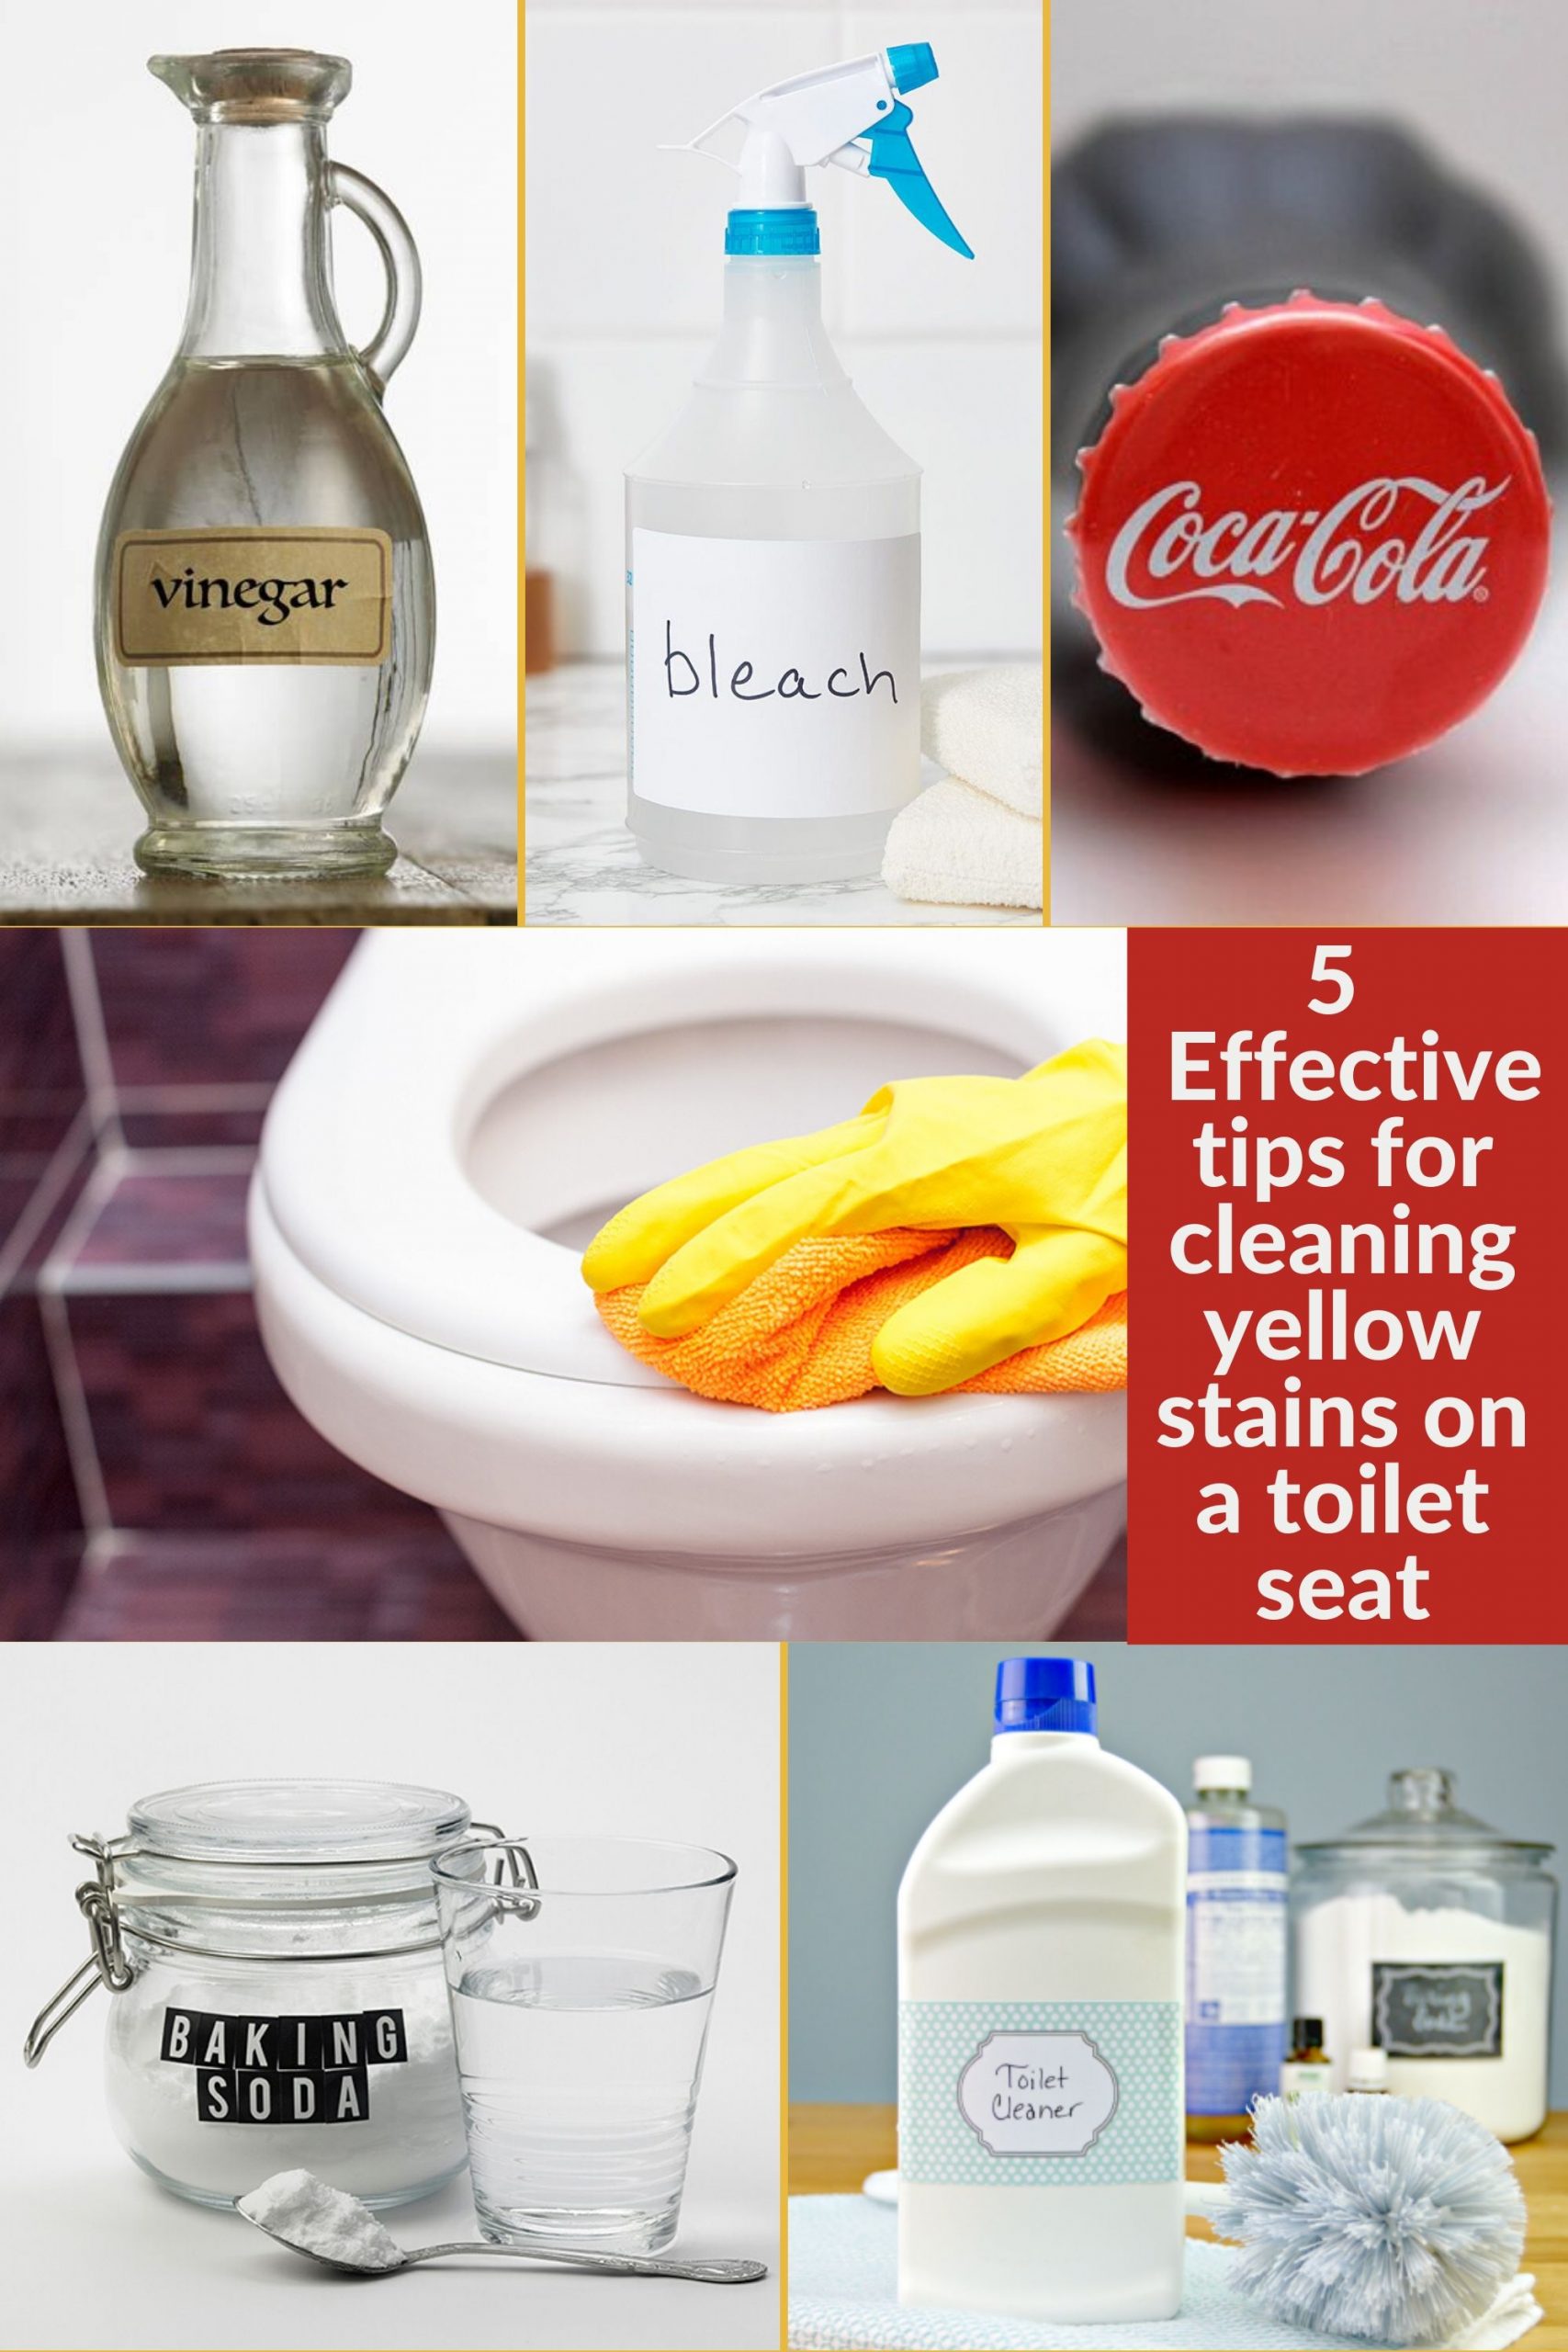 What Causes Yellow Stains On Toilet Seat & How To Clean